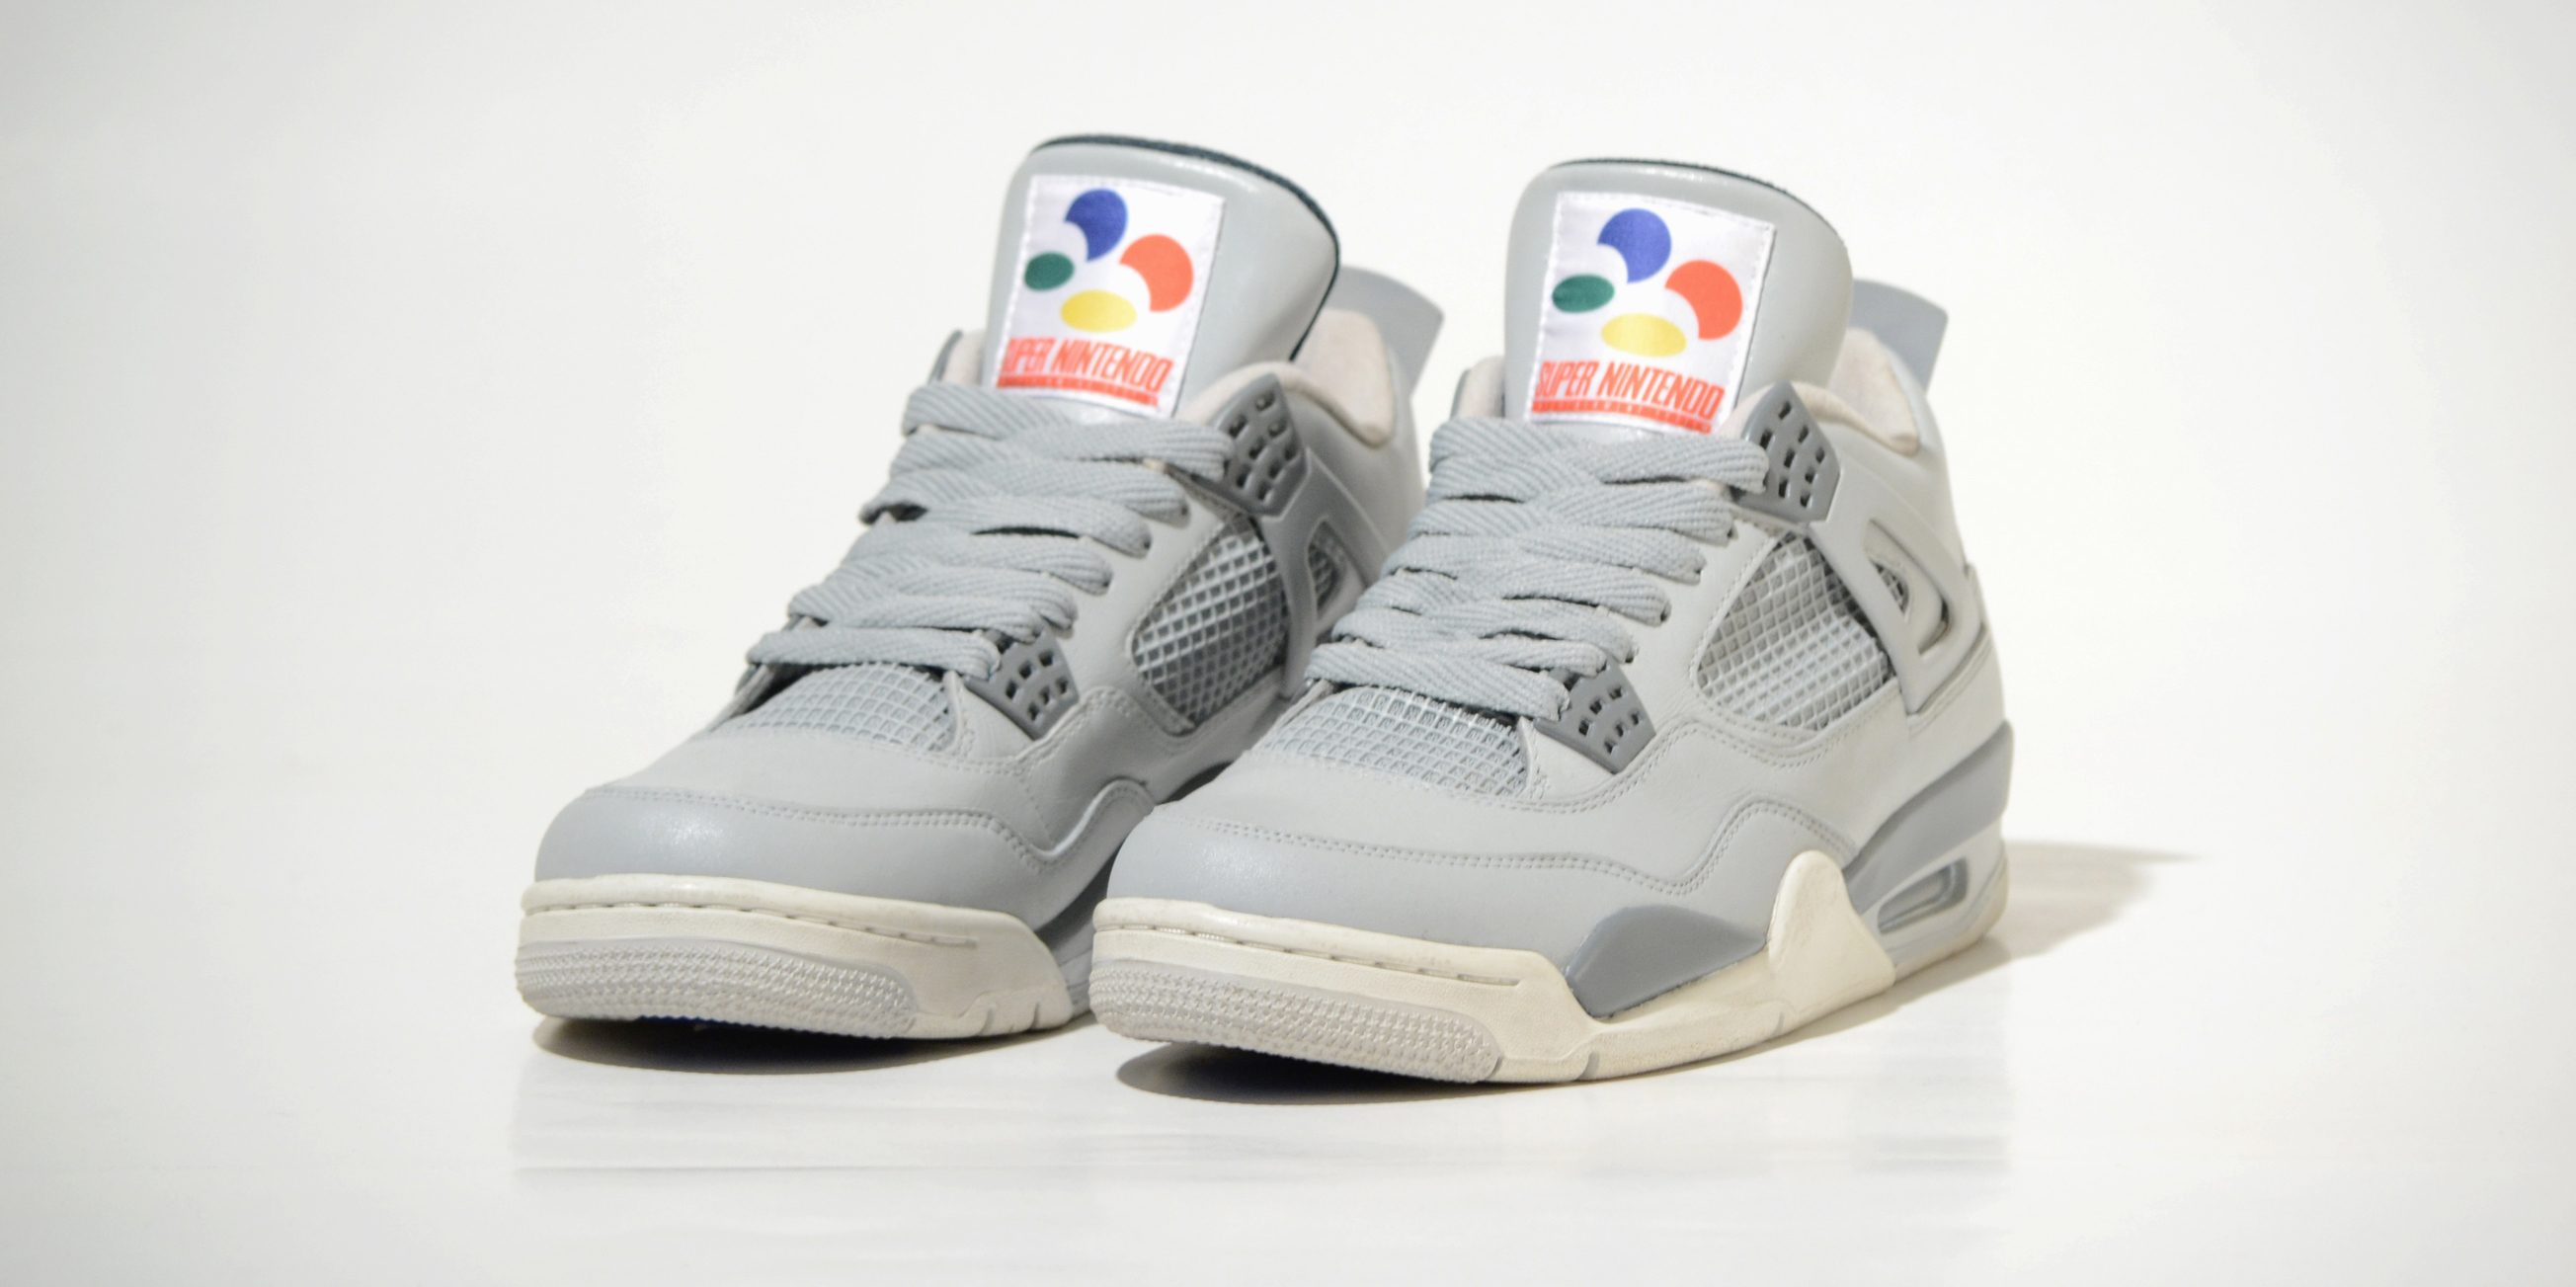 You absolutely have to check these custom Air Jordan 4 Super Nintendo sneakers